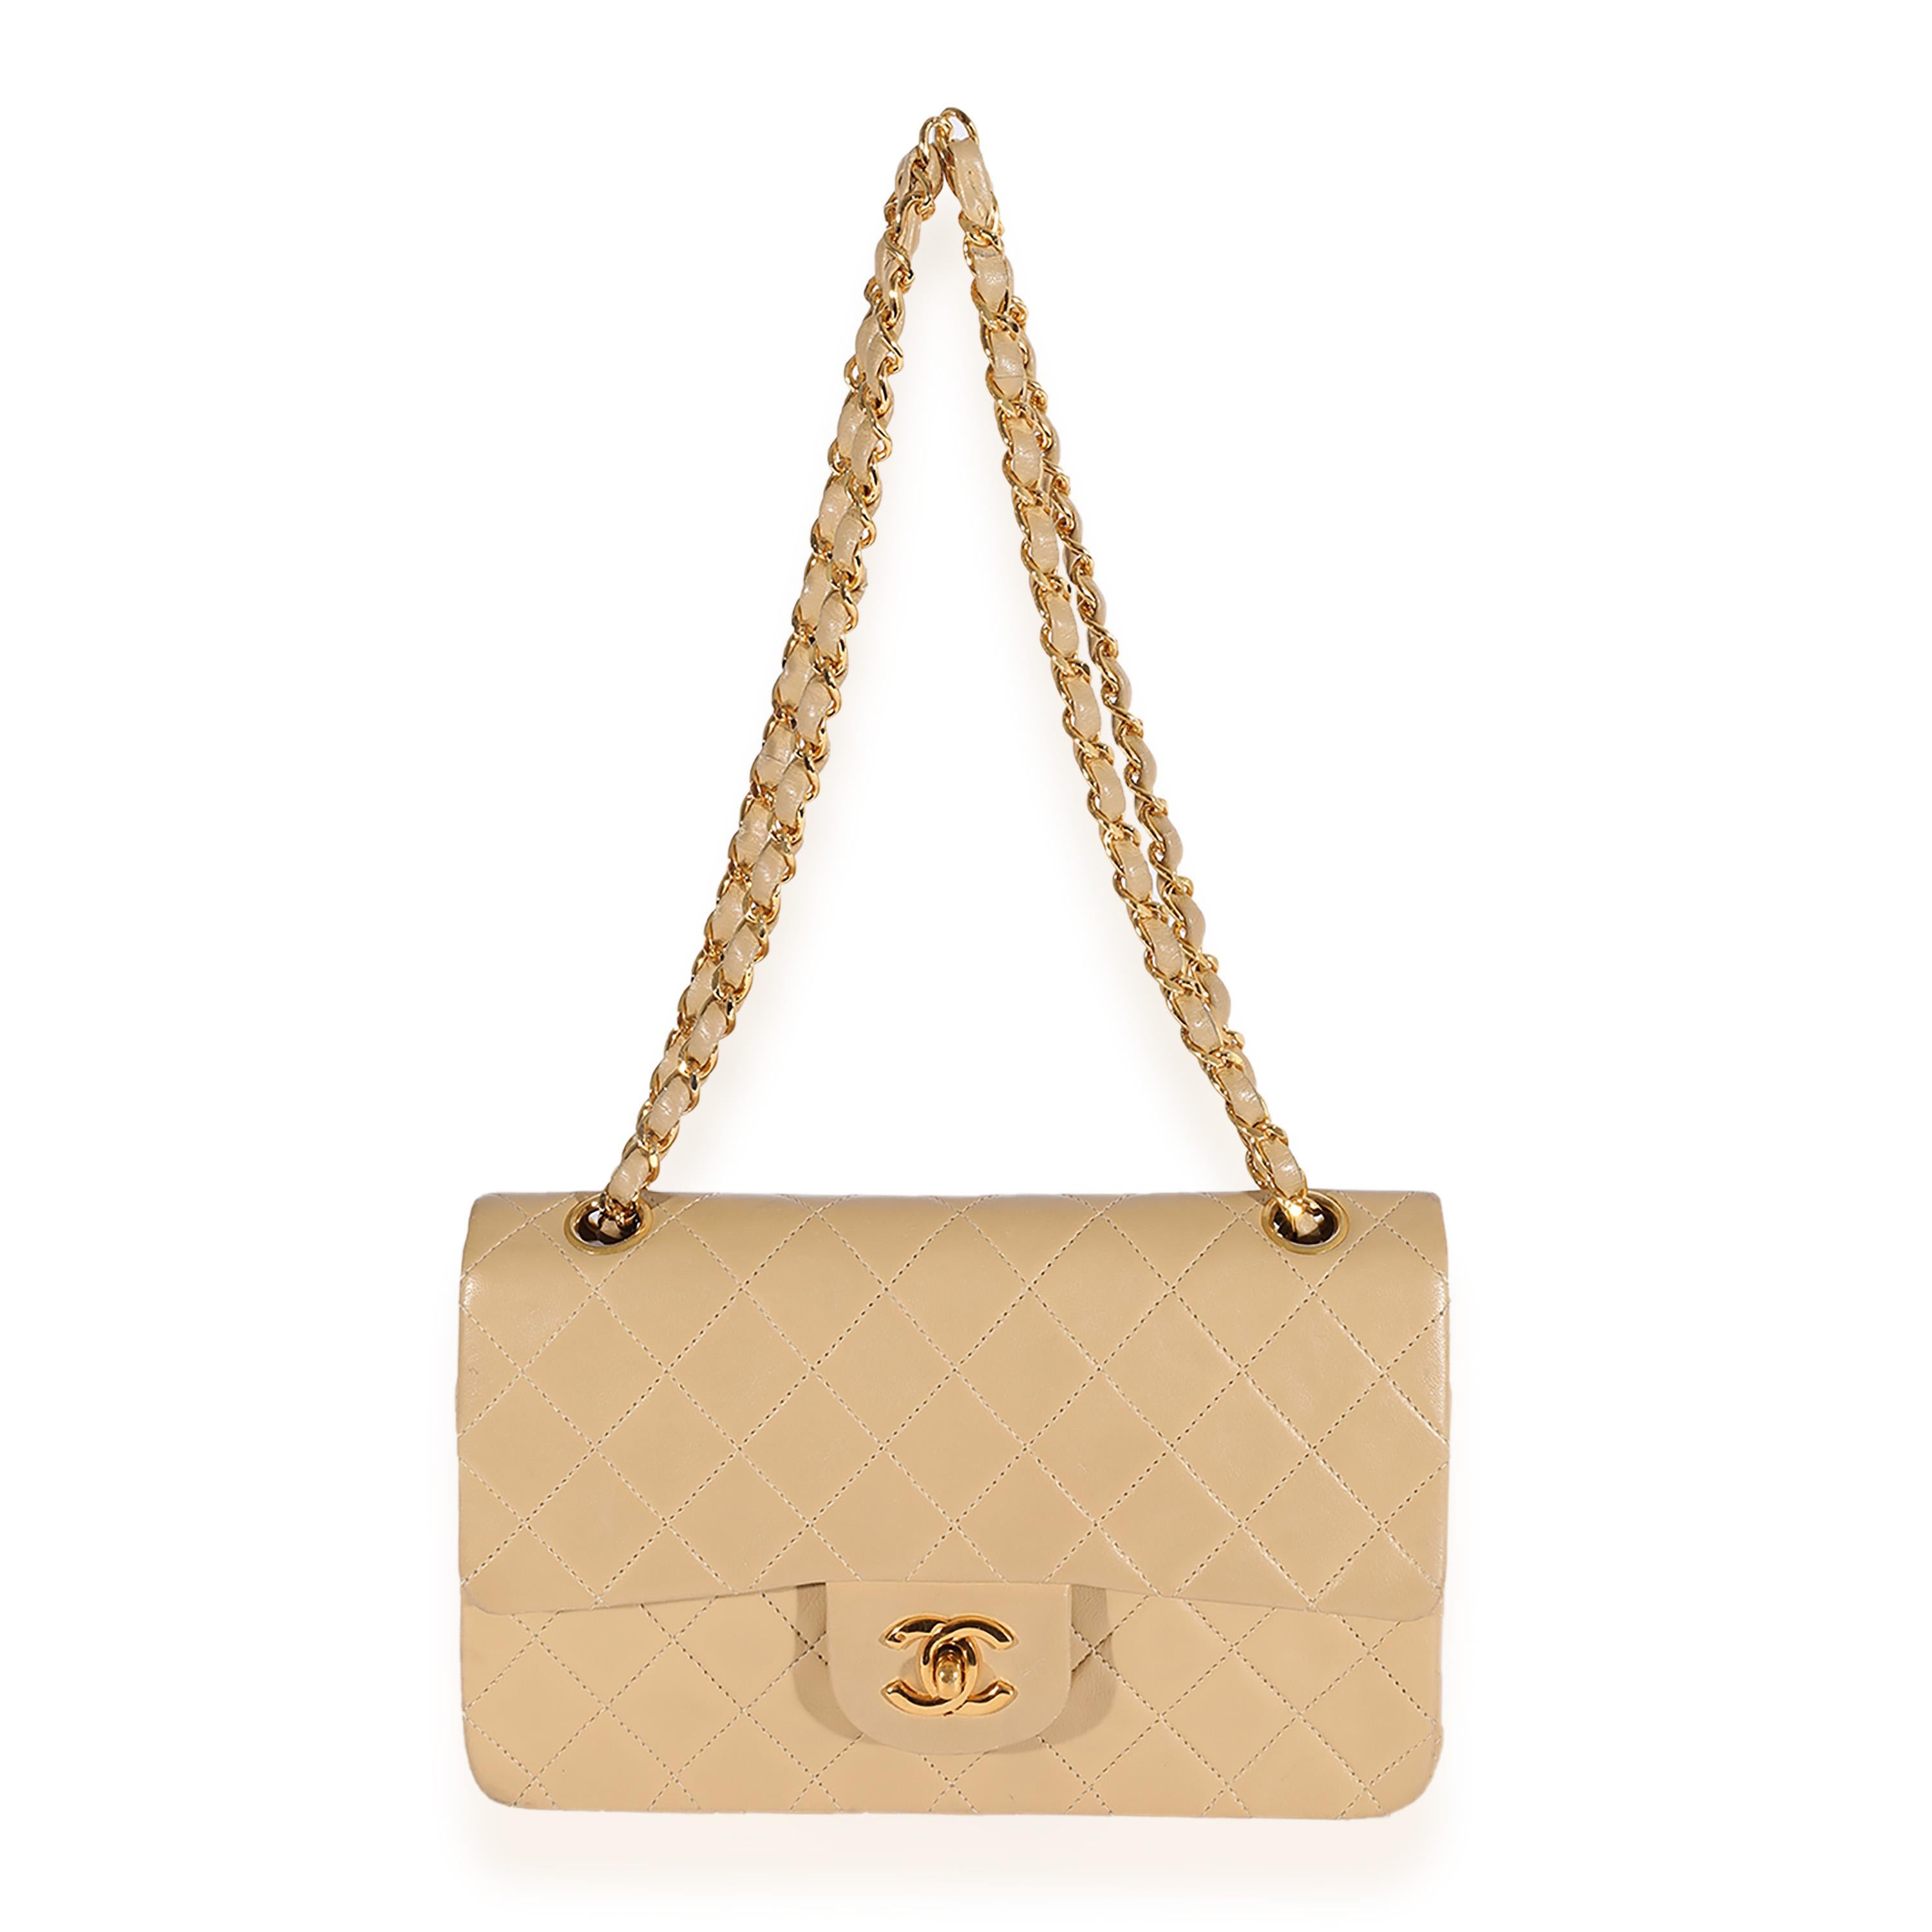 Listing Title: Chanel Vintage Beige Quilted Lambskin Small Classic Double Flap Bag
SKU: 125024
Condition: Pre-owned 
Handbag Condition: Fair
Condition Comments: Fair Condition. Scuffing to corners and exterior. Discoloration and press marks